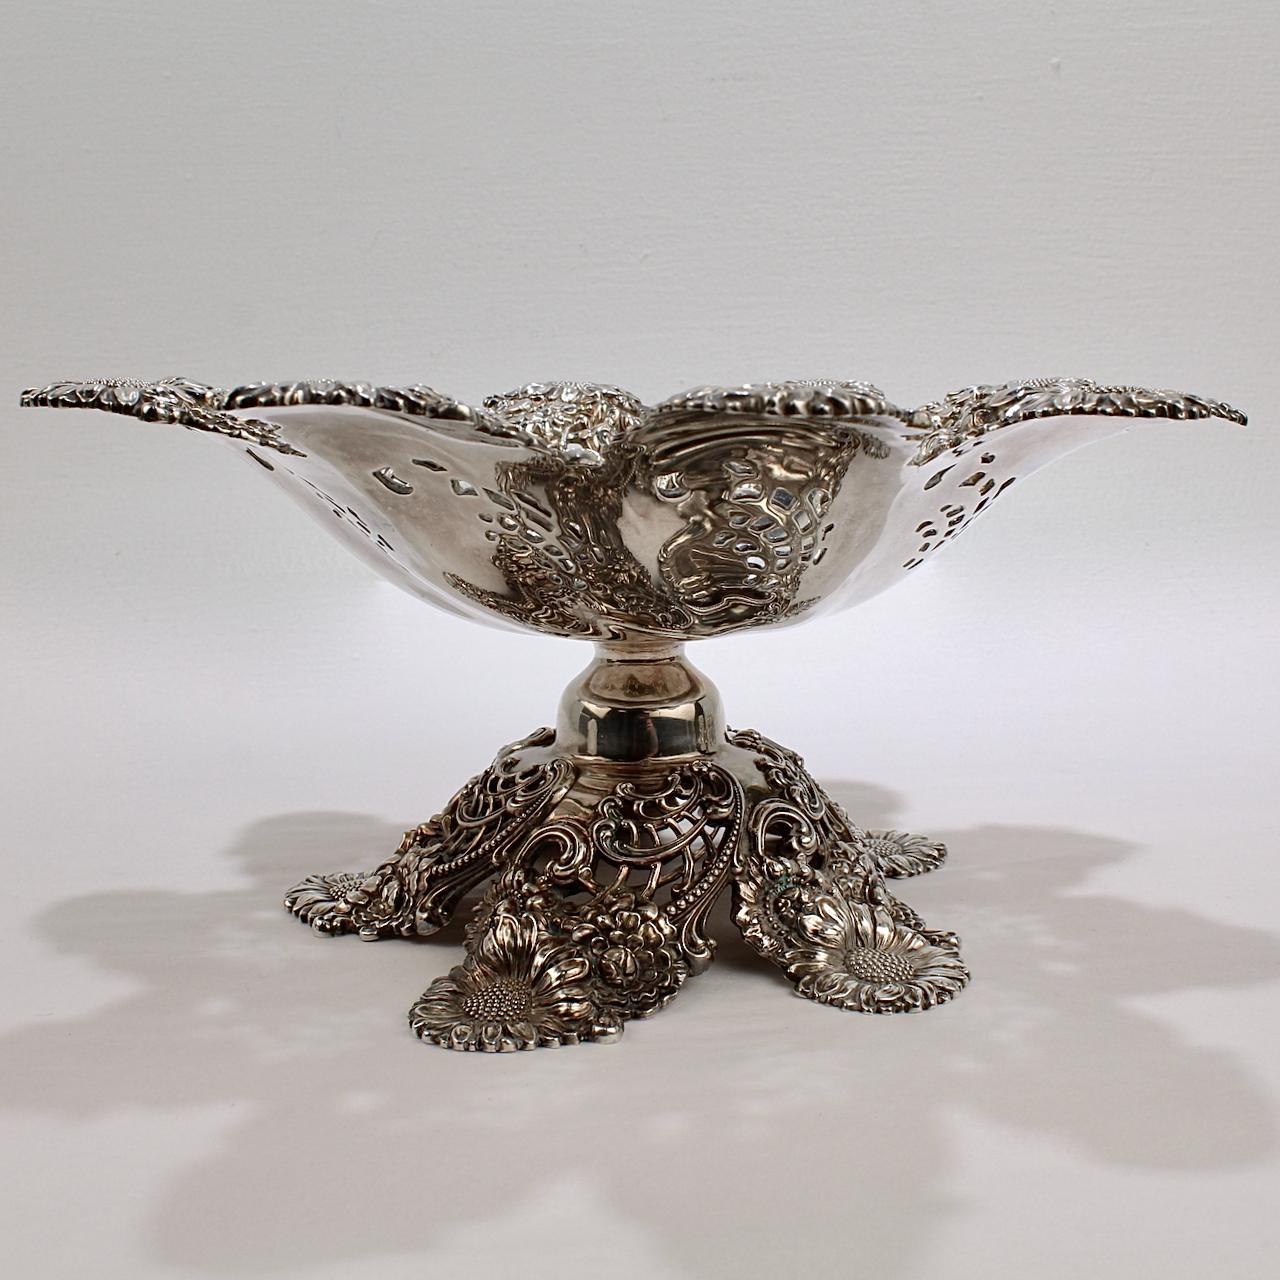 American Art Nouveau Sterling Silver Repoussé Footed Bowl by Dominick & Haff 2